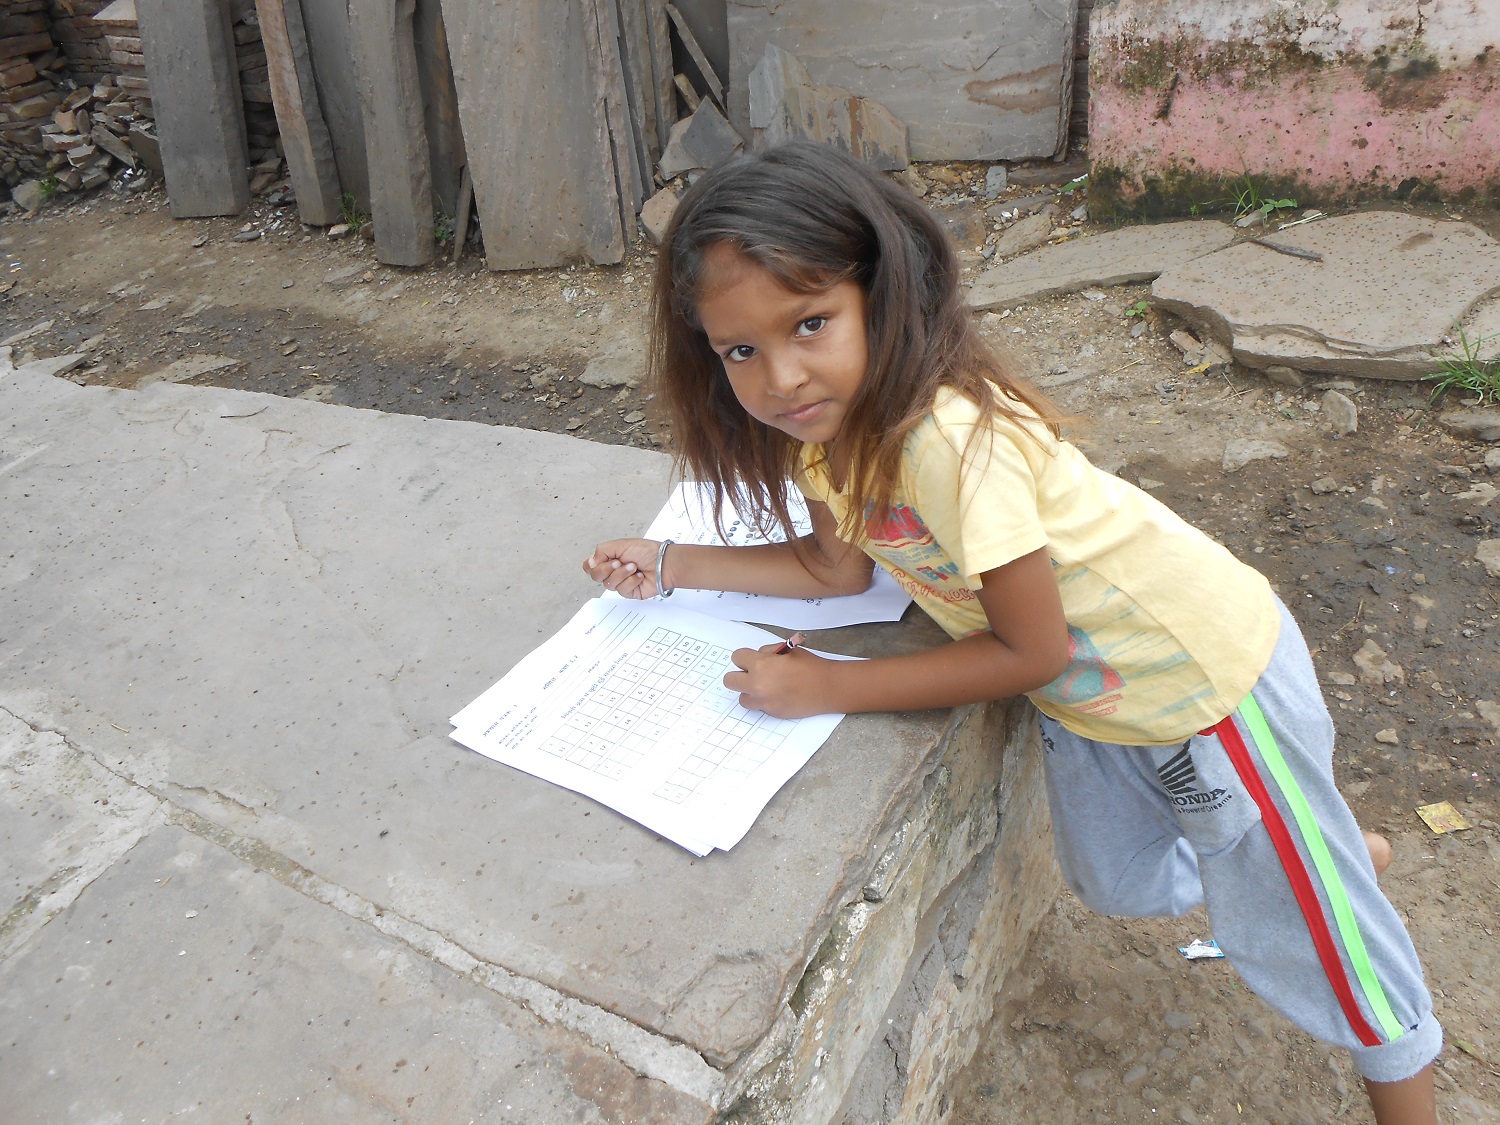 Young girl leaning over, solving worksheets, resting on pile of stone slabs, in Budhpura, Rajasthan, India